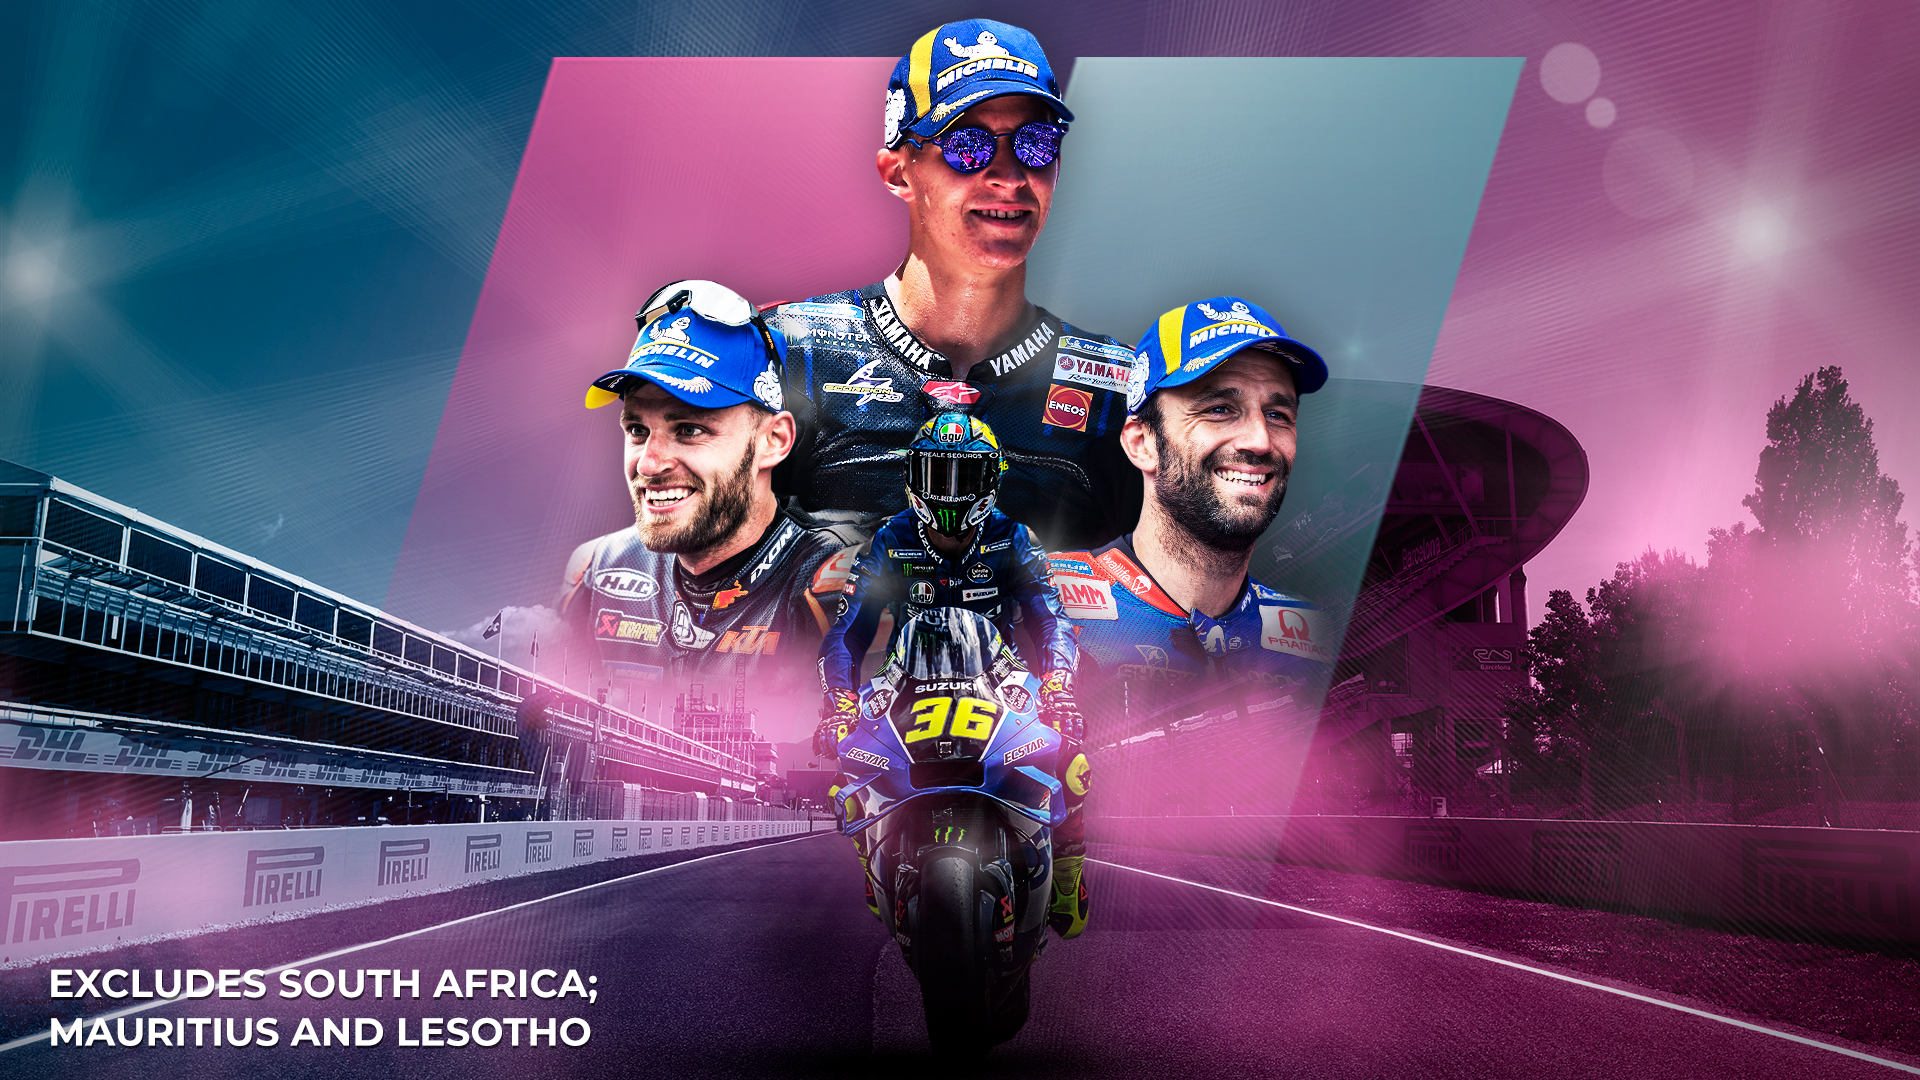 6 riders to look out for in this season of MotoGP, live on Showmax Pro